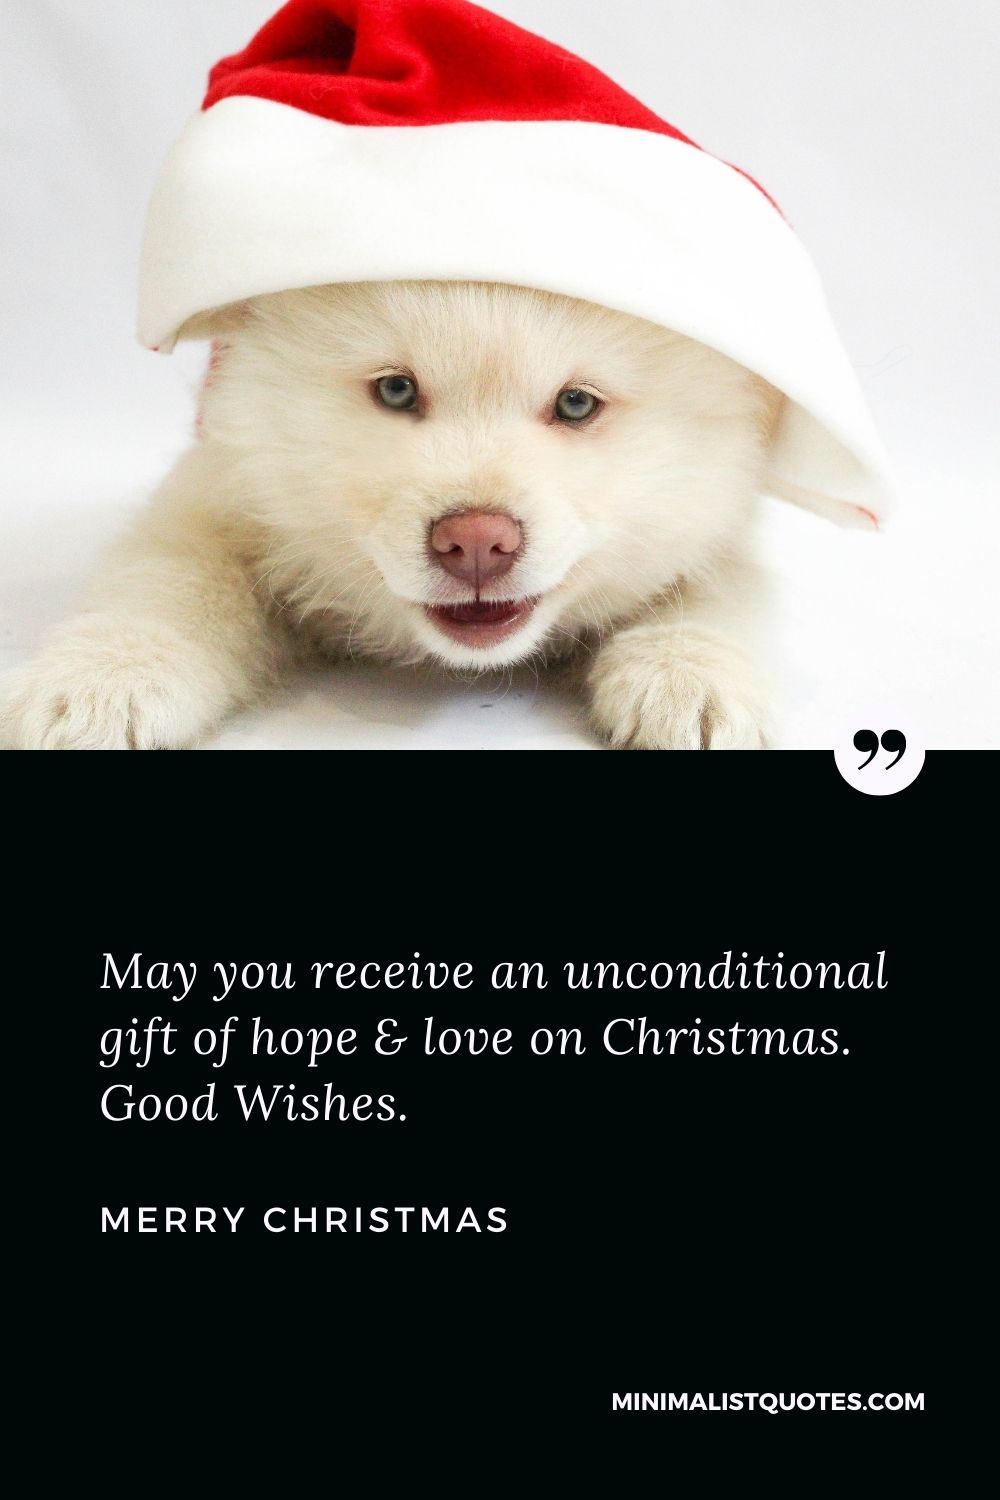 Merry Christmas Wish - May you receive an unconditional gift of hope & love on Christmas. Good Wishes.